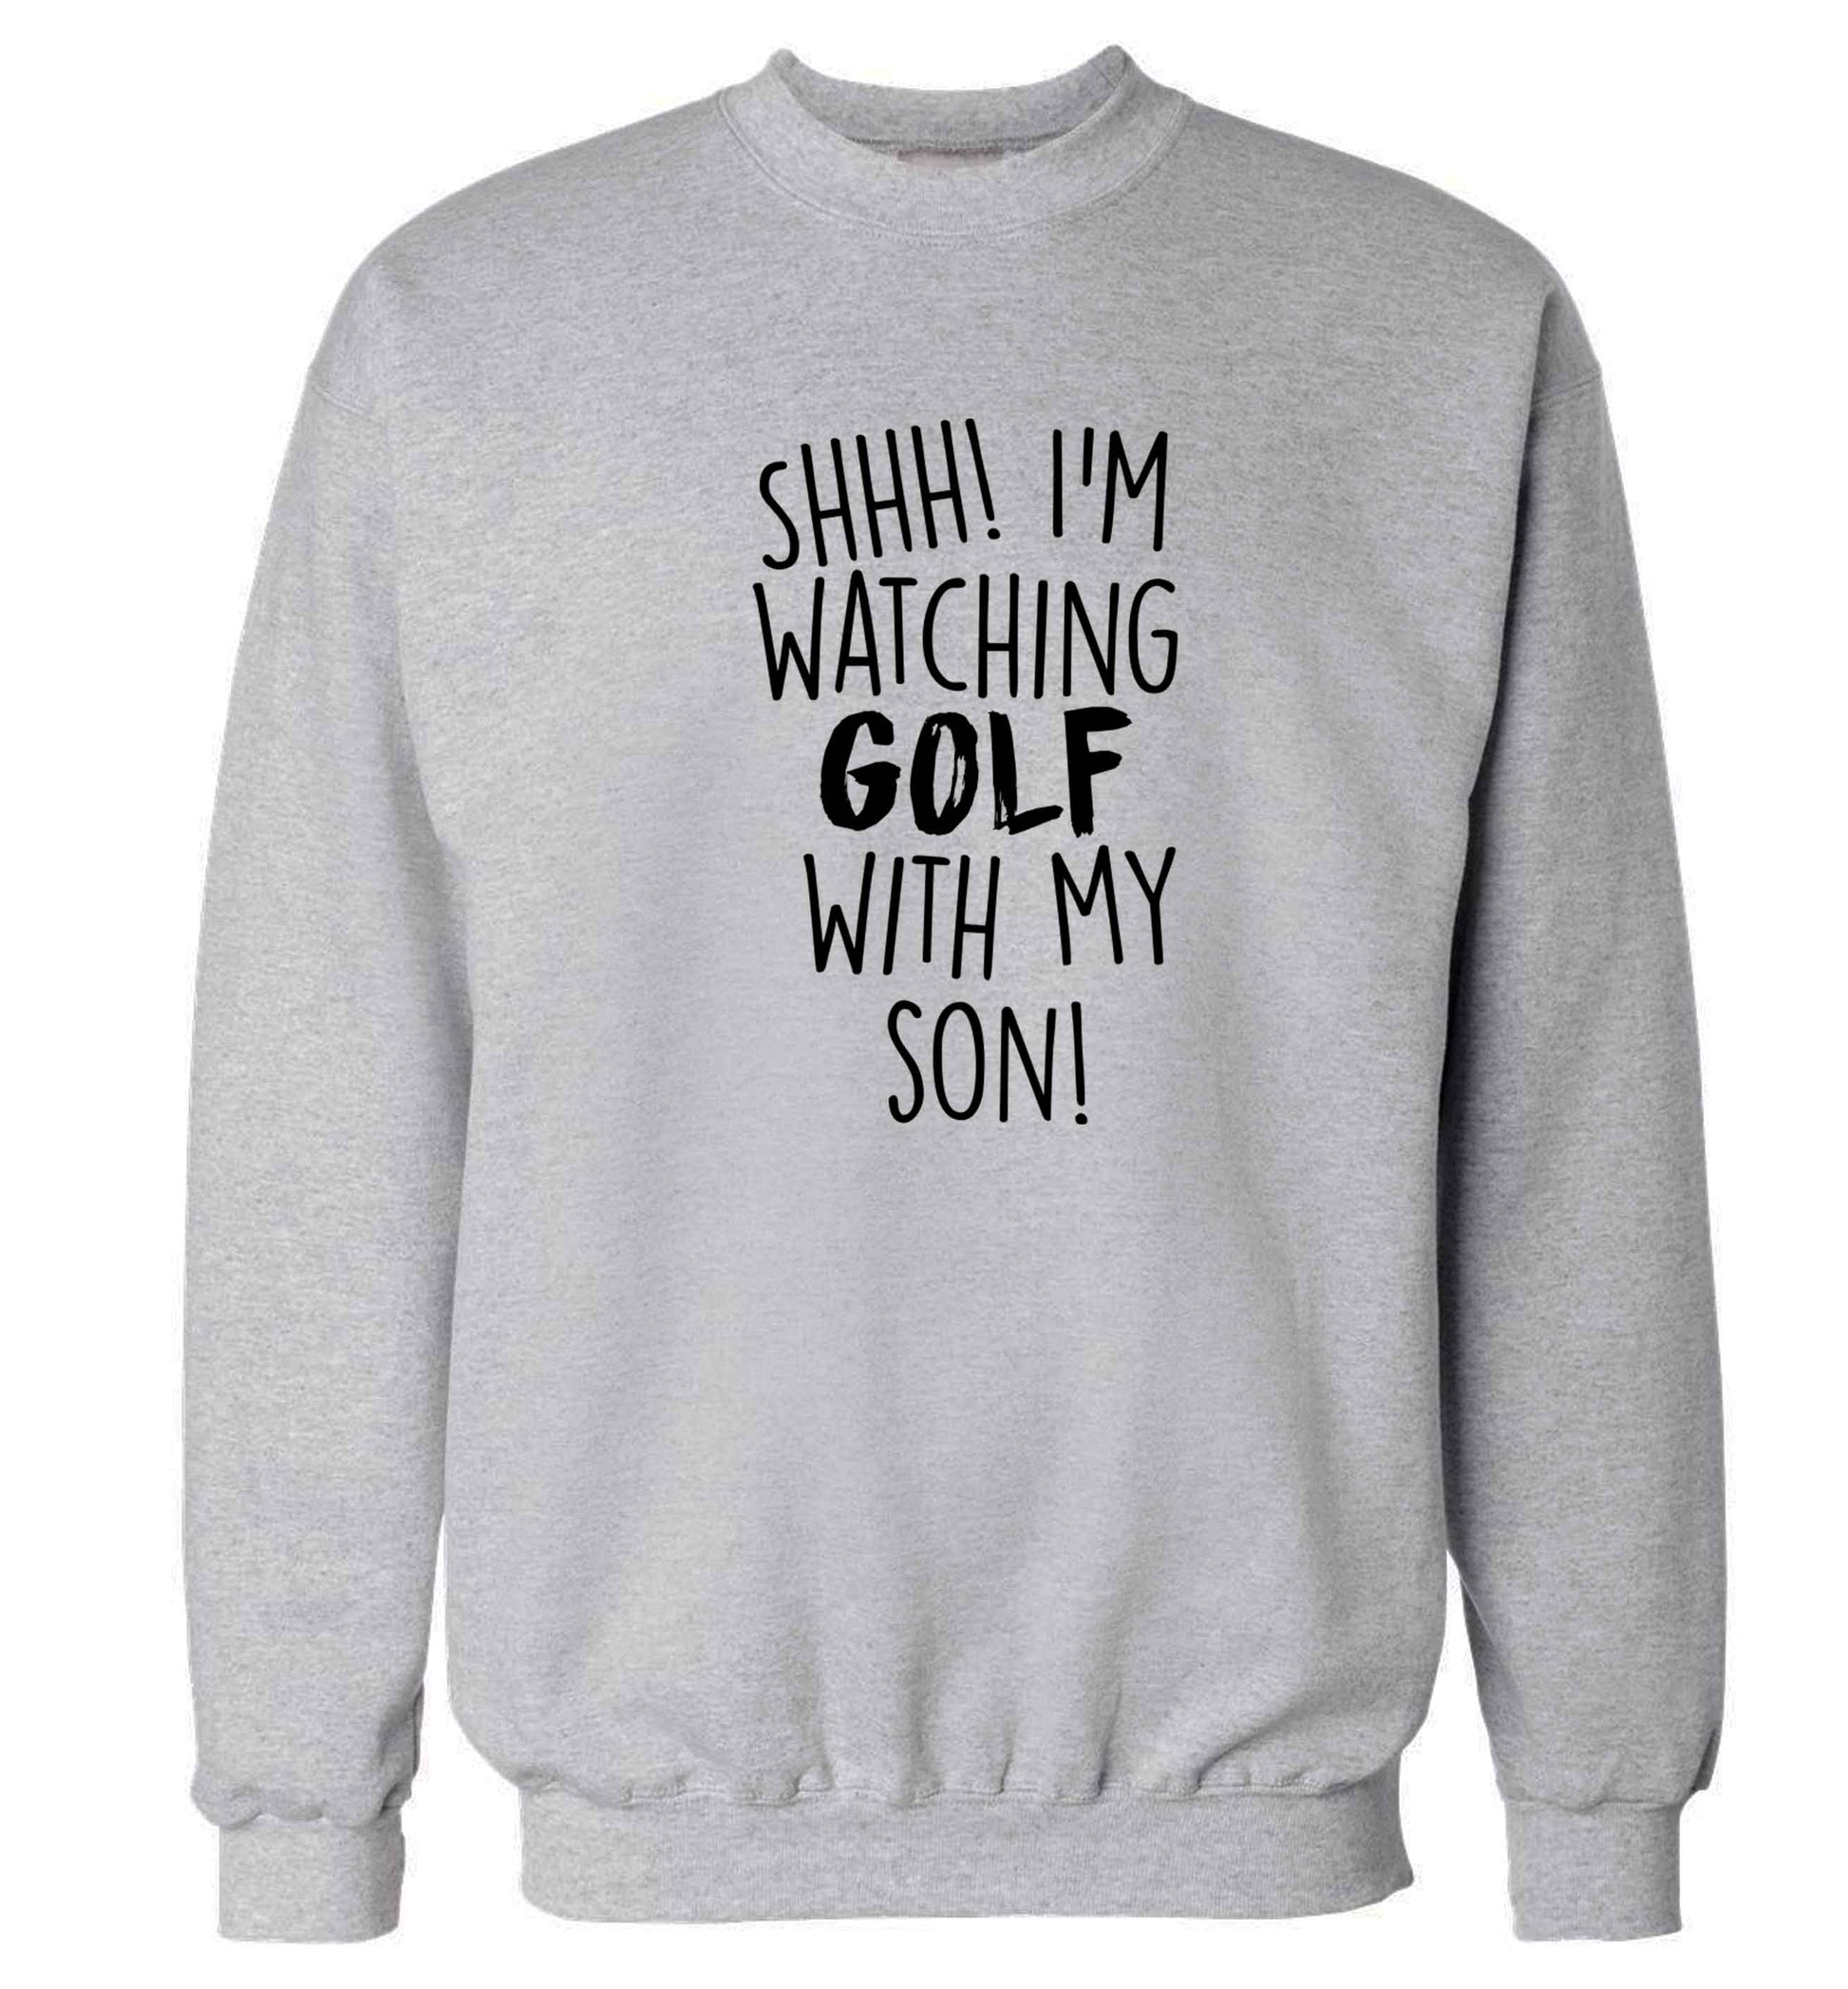 Shh I'm watching golf with my son Adult's unisex grey Sweater 2XL